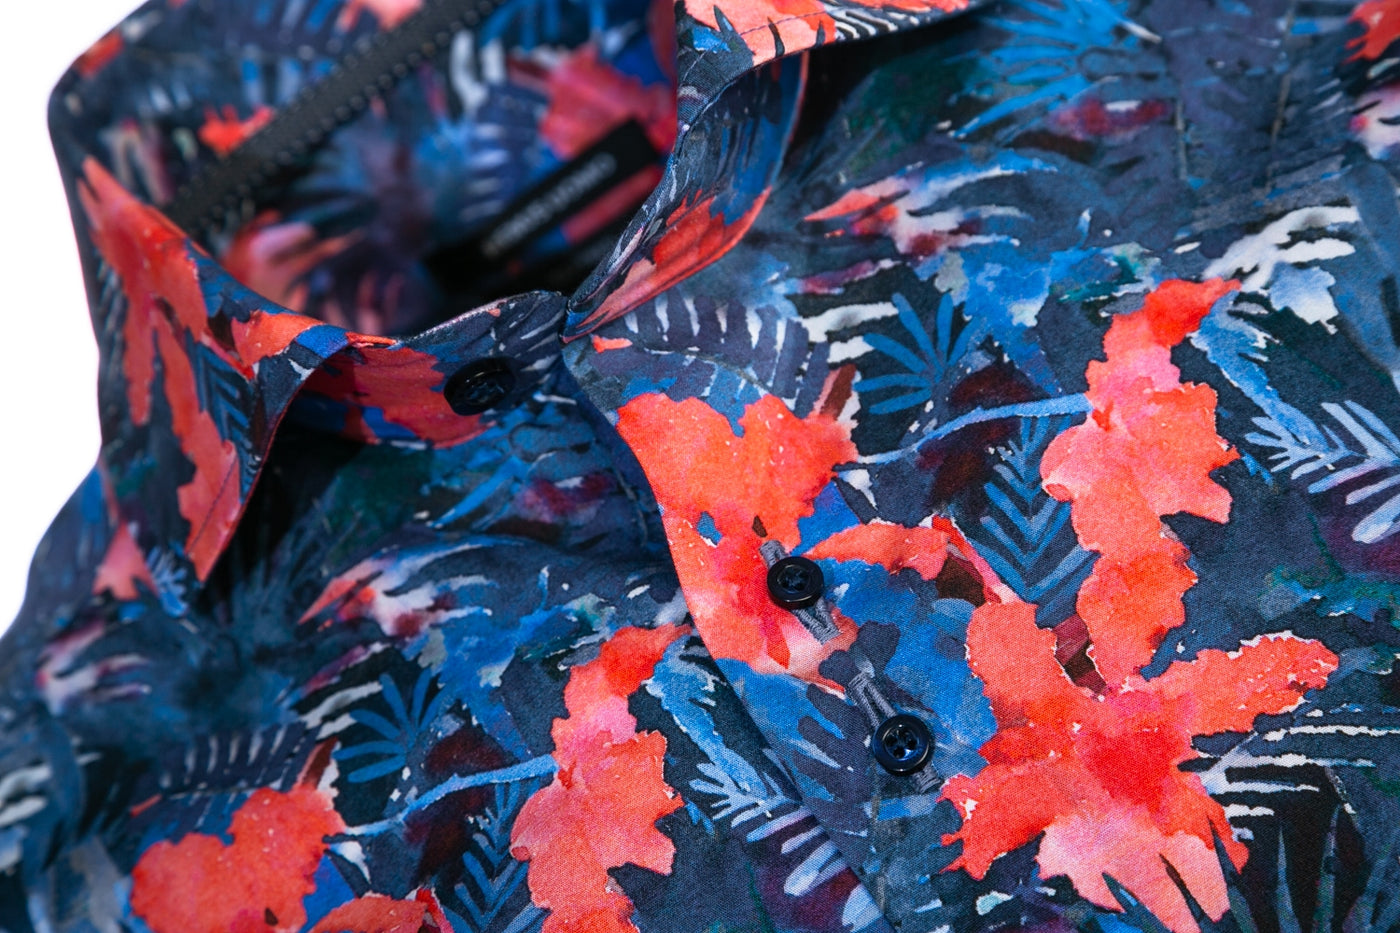 Remus Uomo Floral Print Shirt in Navy & Red